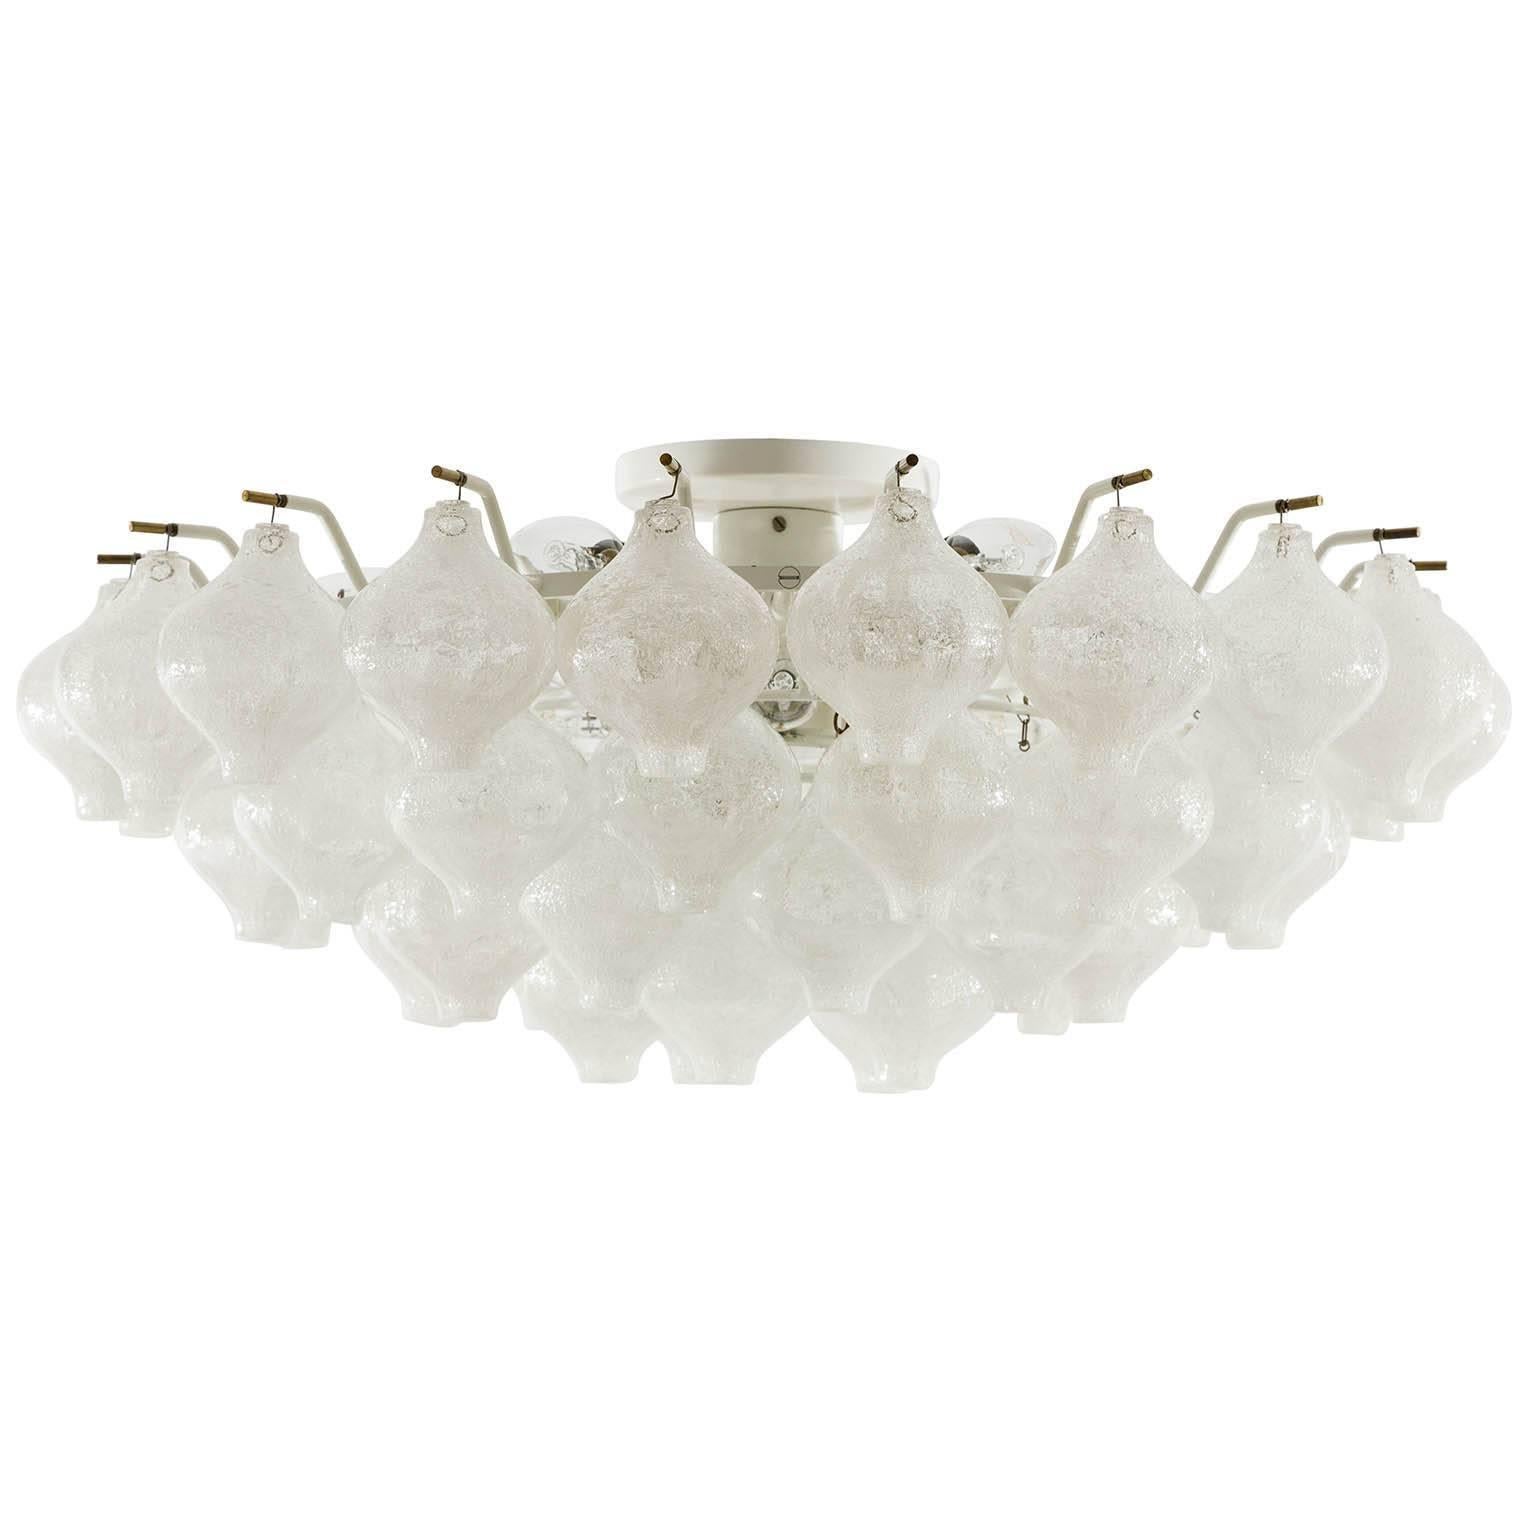 An extra large and gorgeous Mid-Century Modern 'Tulipan' flush mount chandelier by J.T. Kalmar, Austria, Vienna, manufactured in midcentury, circa 1970 (late 1960s or early 1970s).
The name Tulipan derives from the tulip shaped hand blown bubble